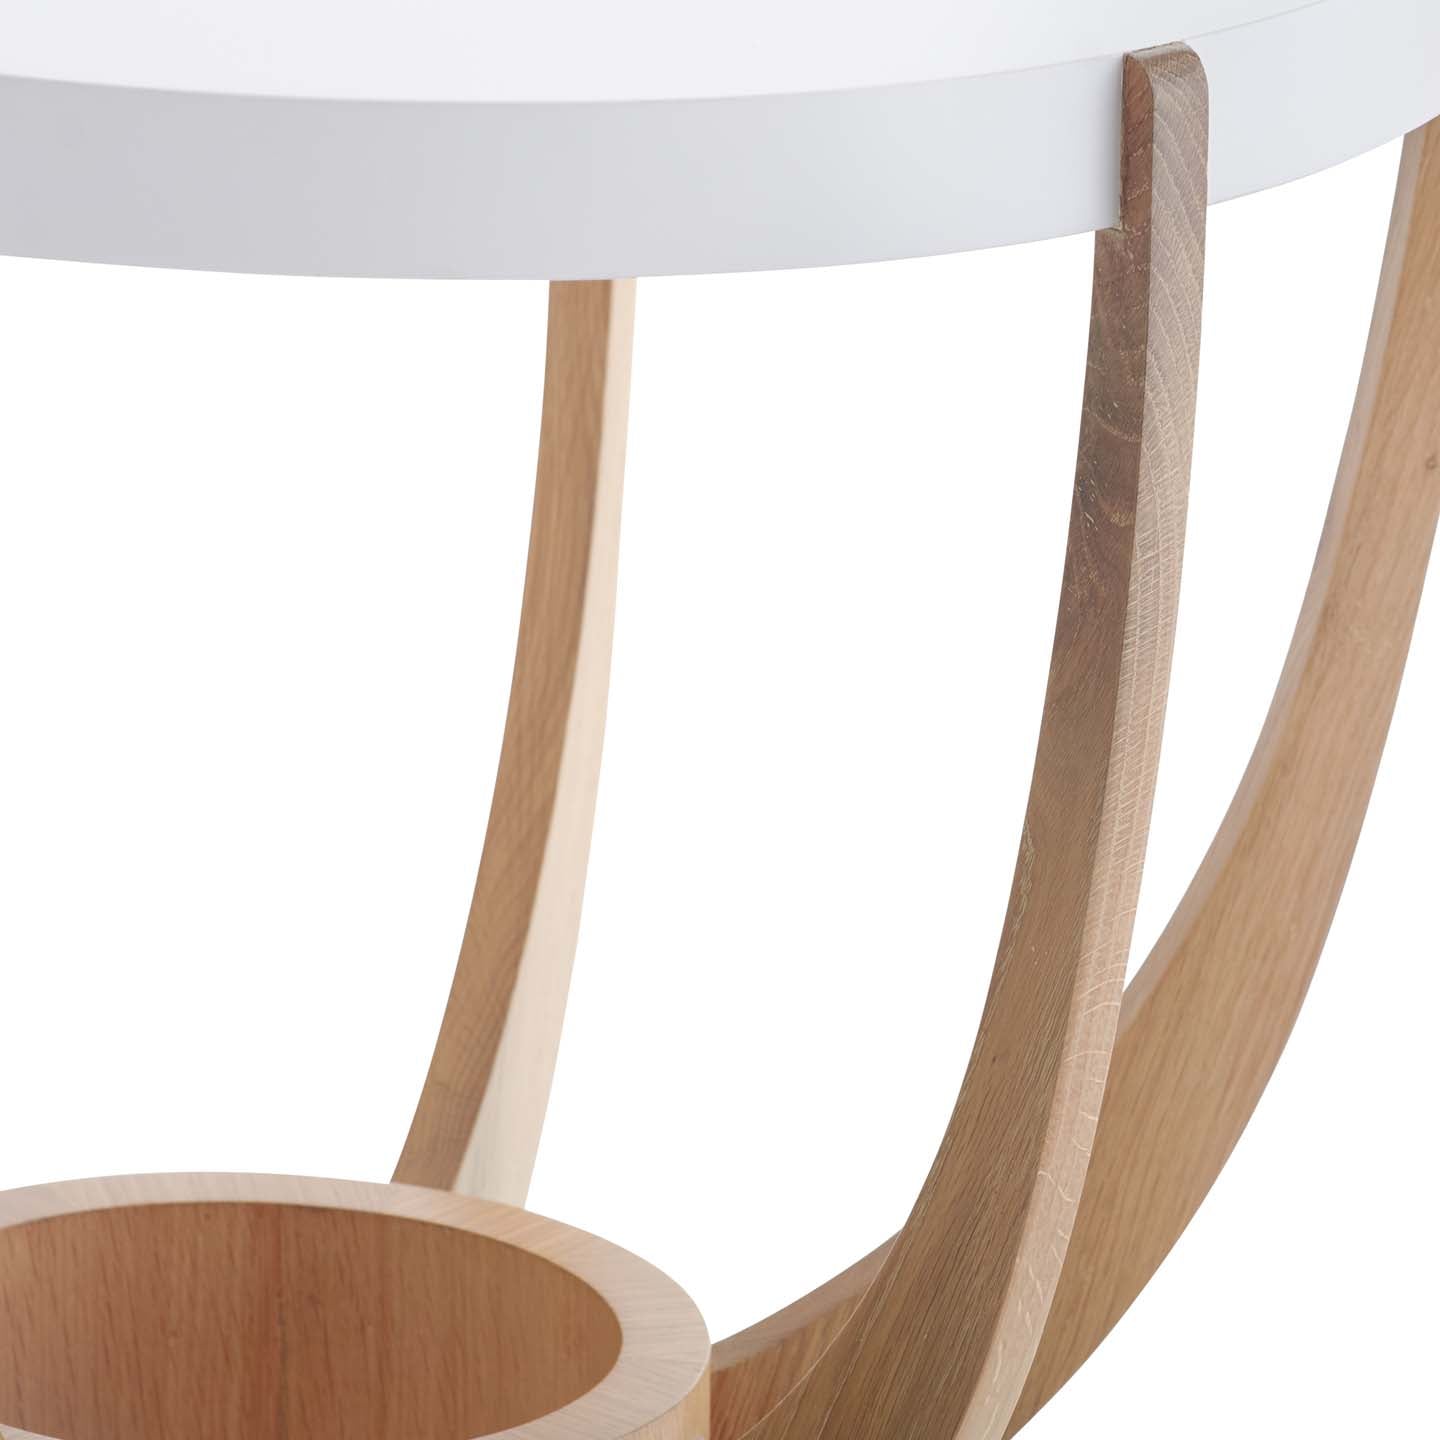 Nia Side Table